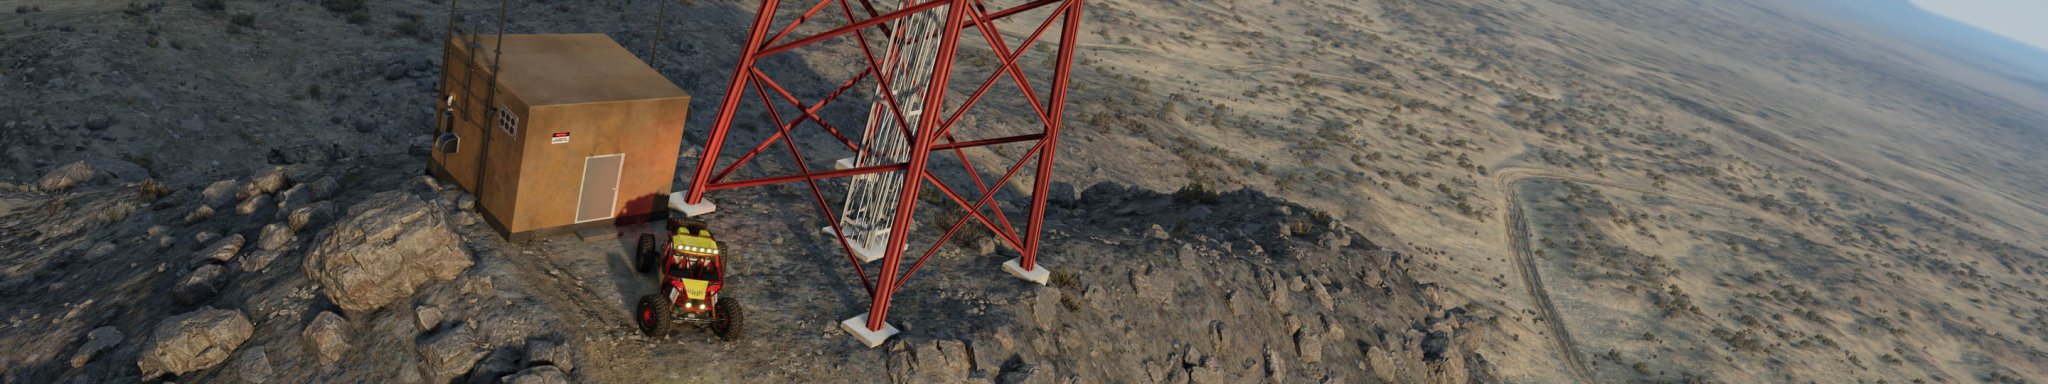 0 BeamNG ROCK BASHER at CELL TOWER copy.jpg